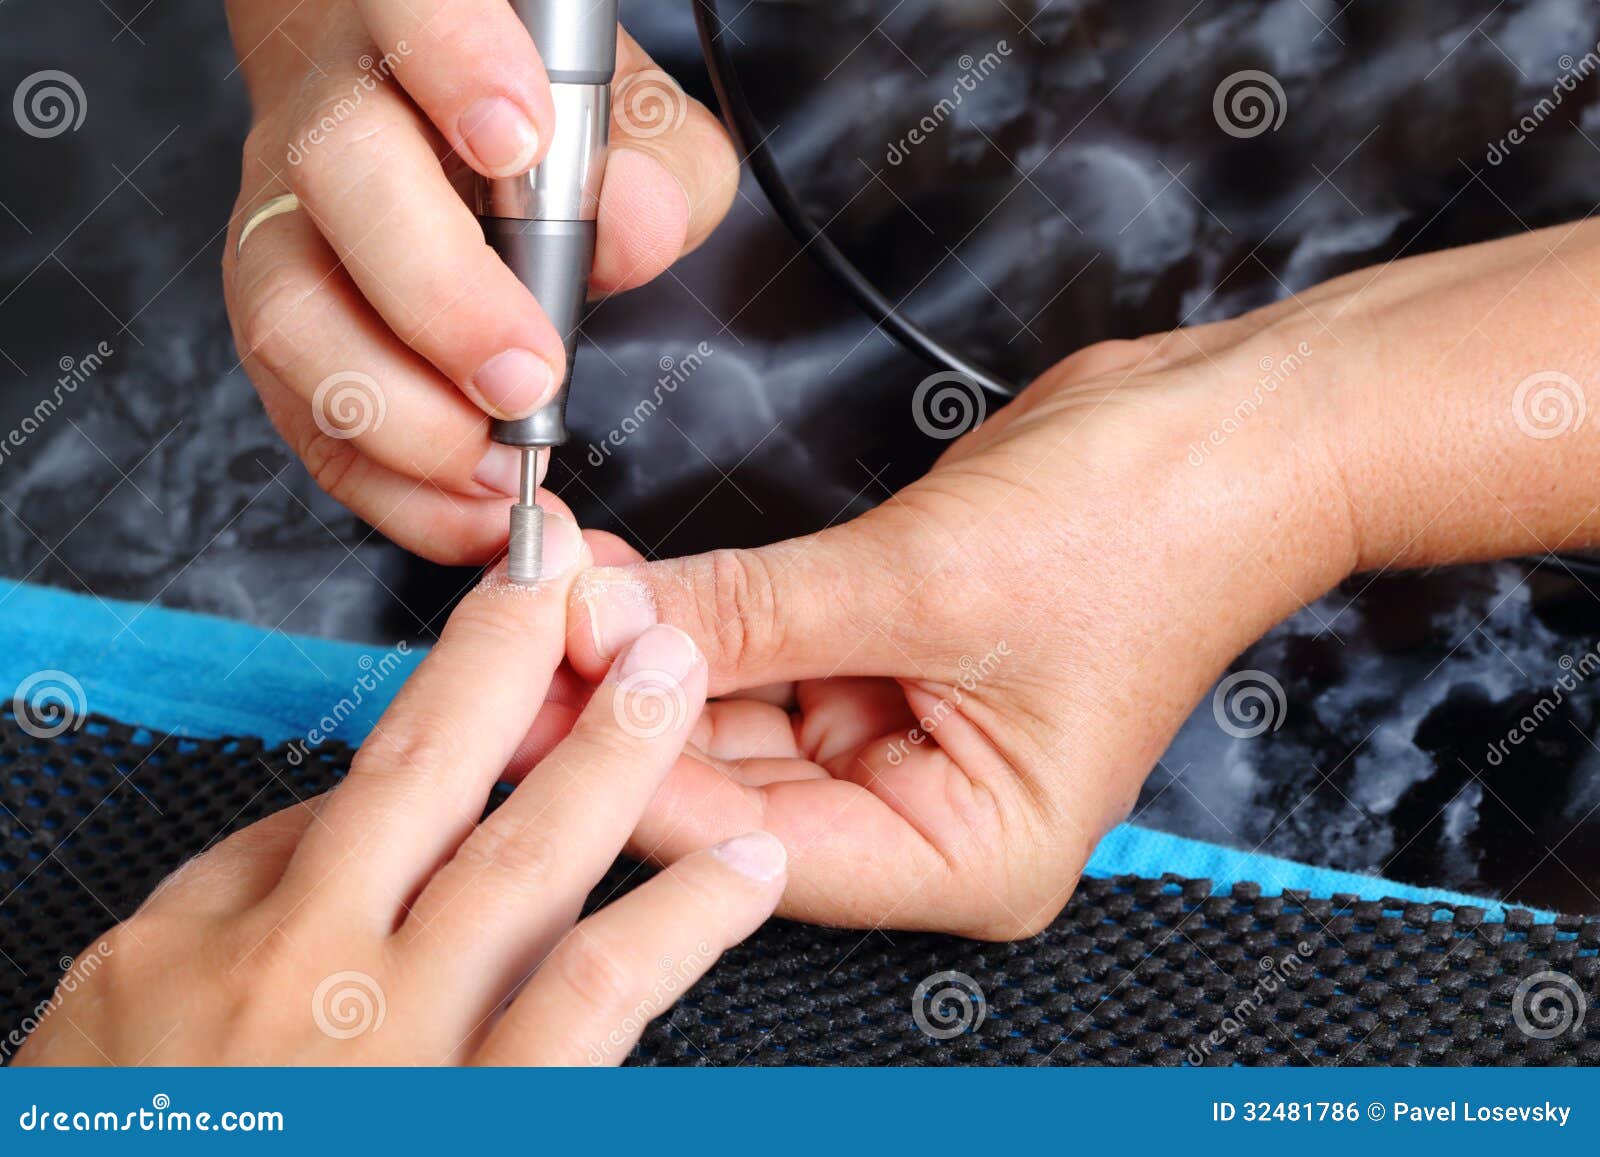 the master uses an electric machine to remove cuticle